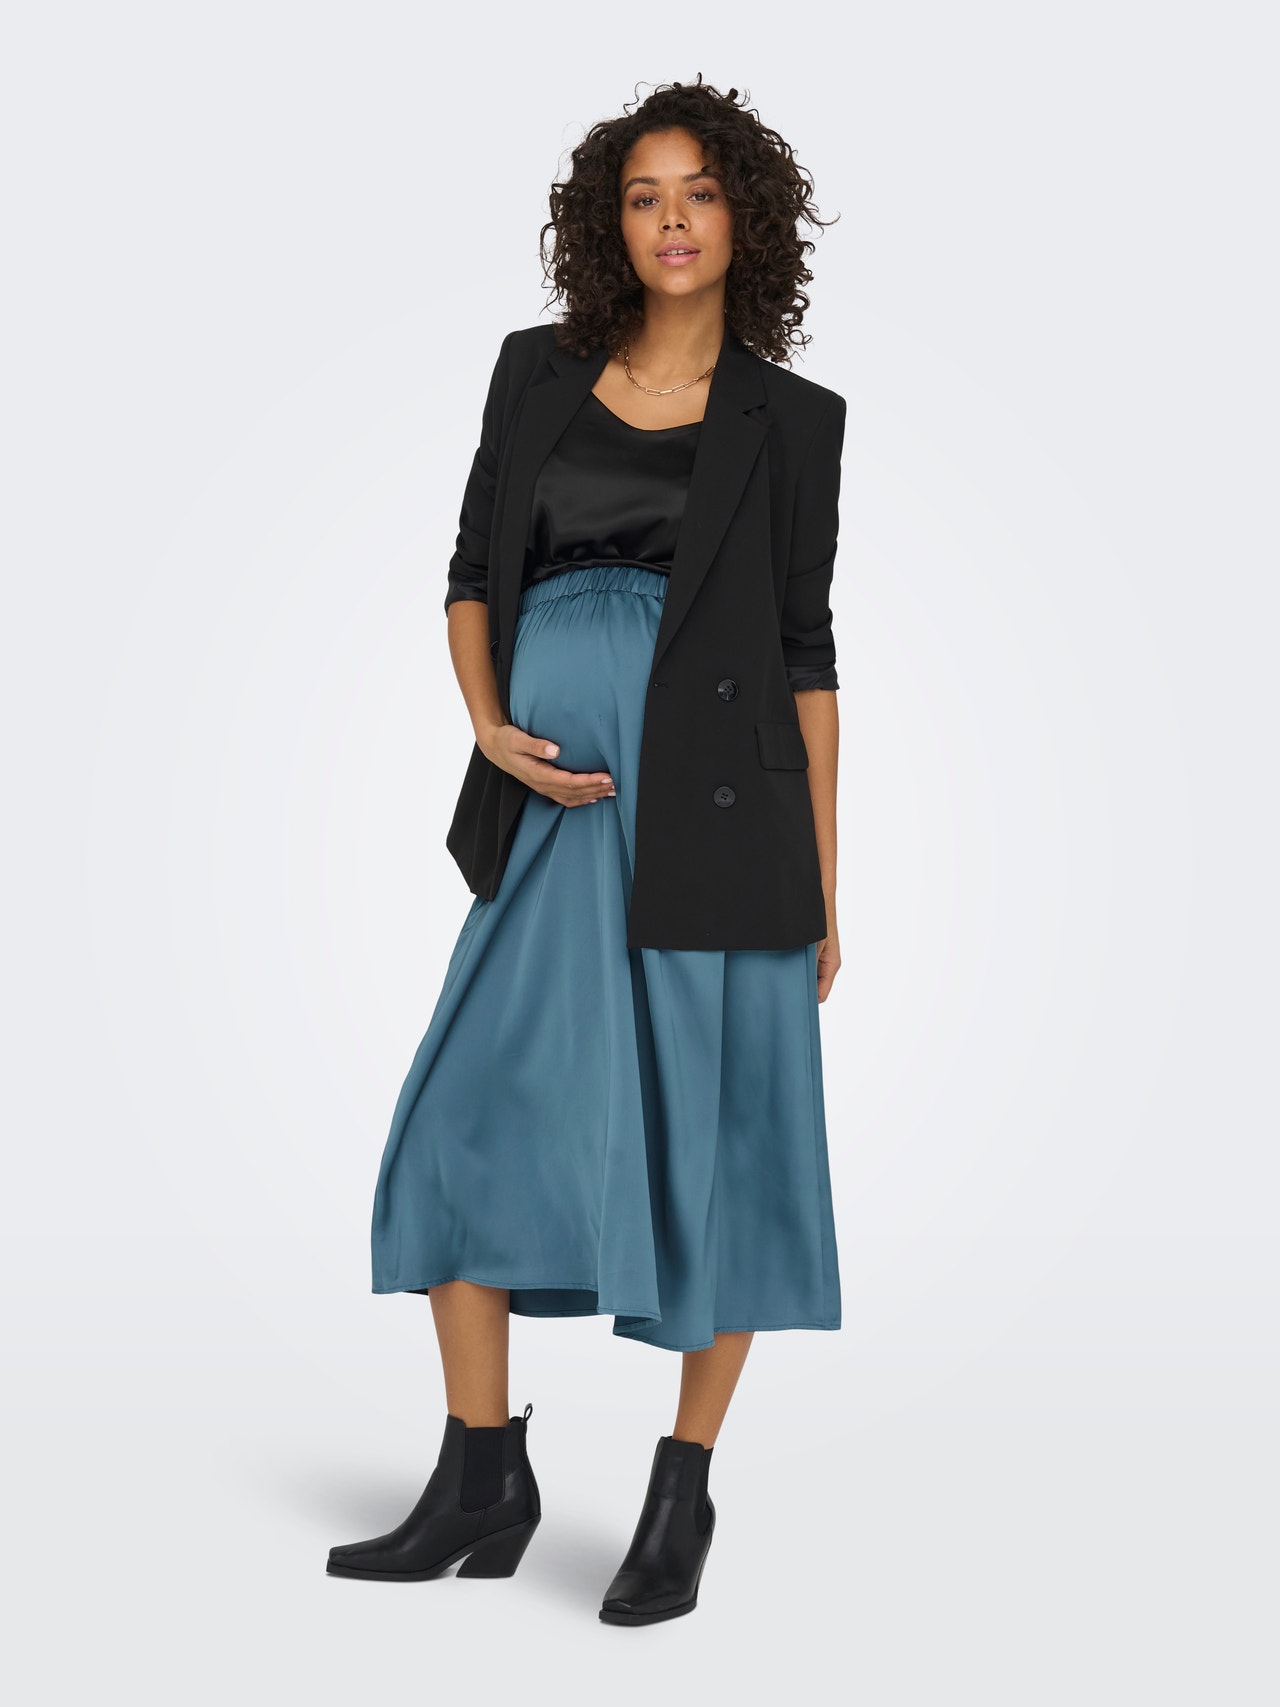 ONLY Mittlere Taille Maternity Langer Rock -Blue Mirage - 15301379